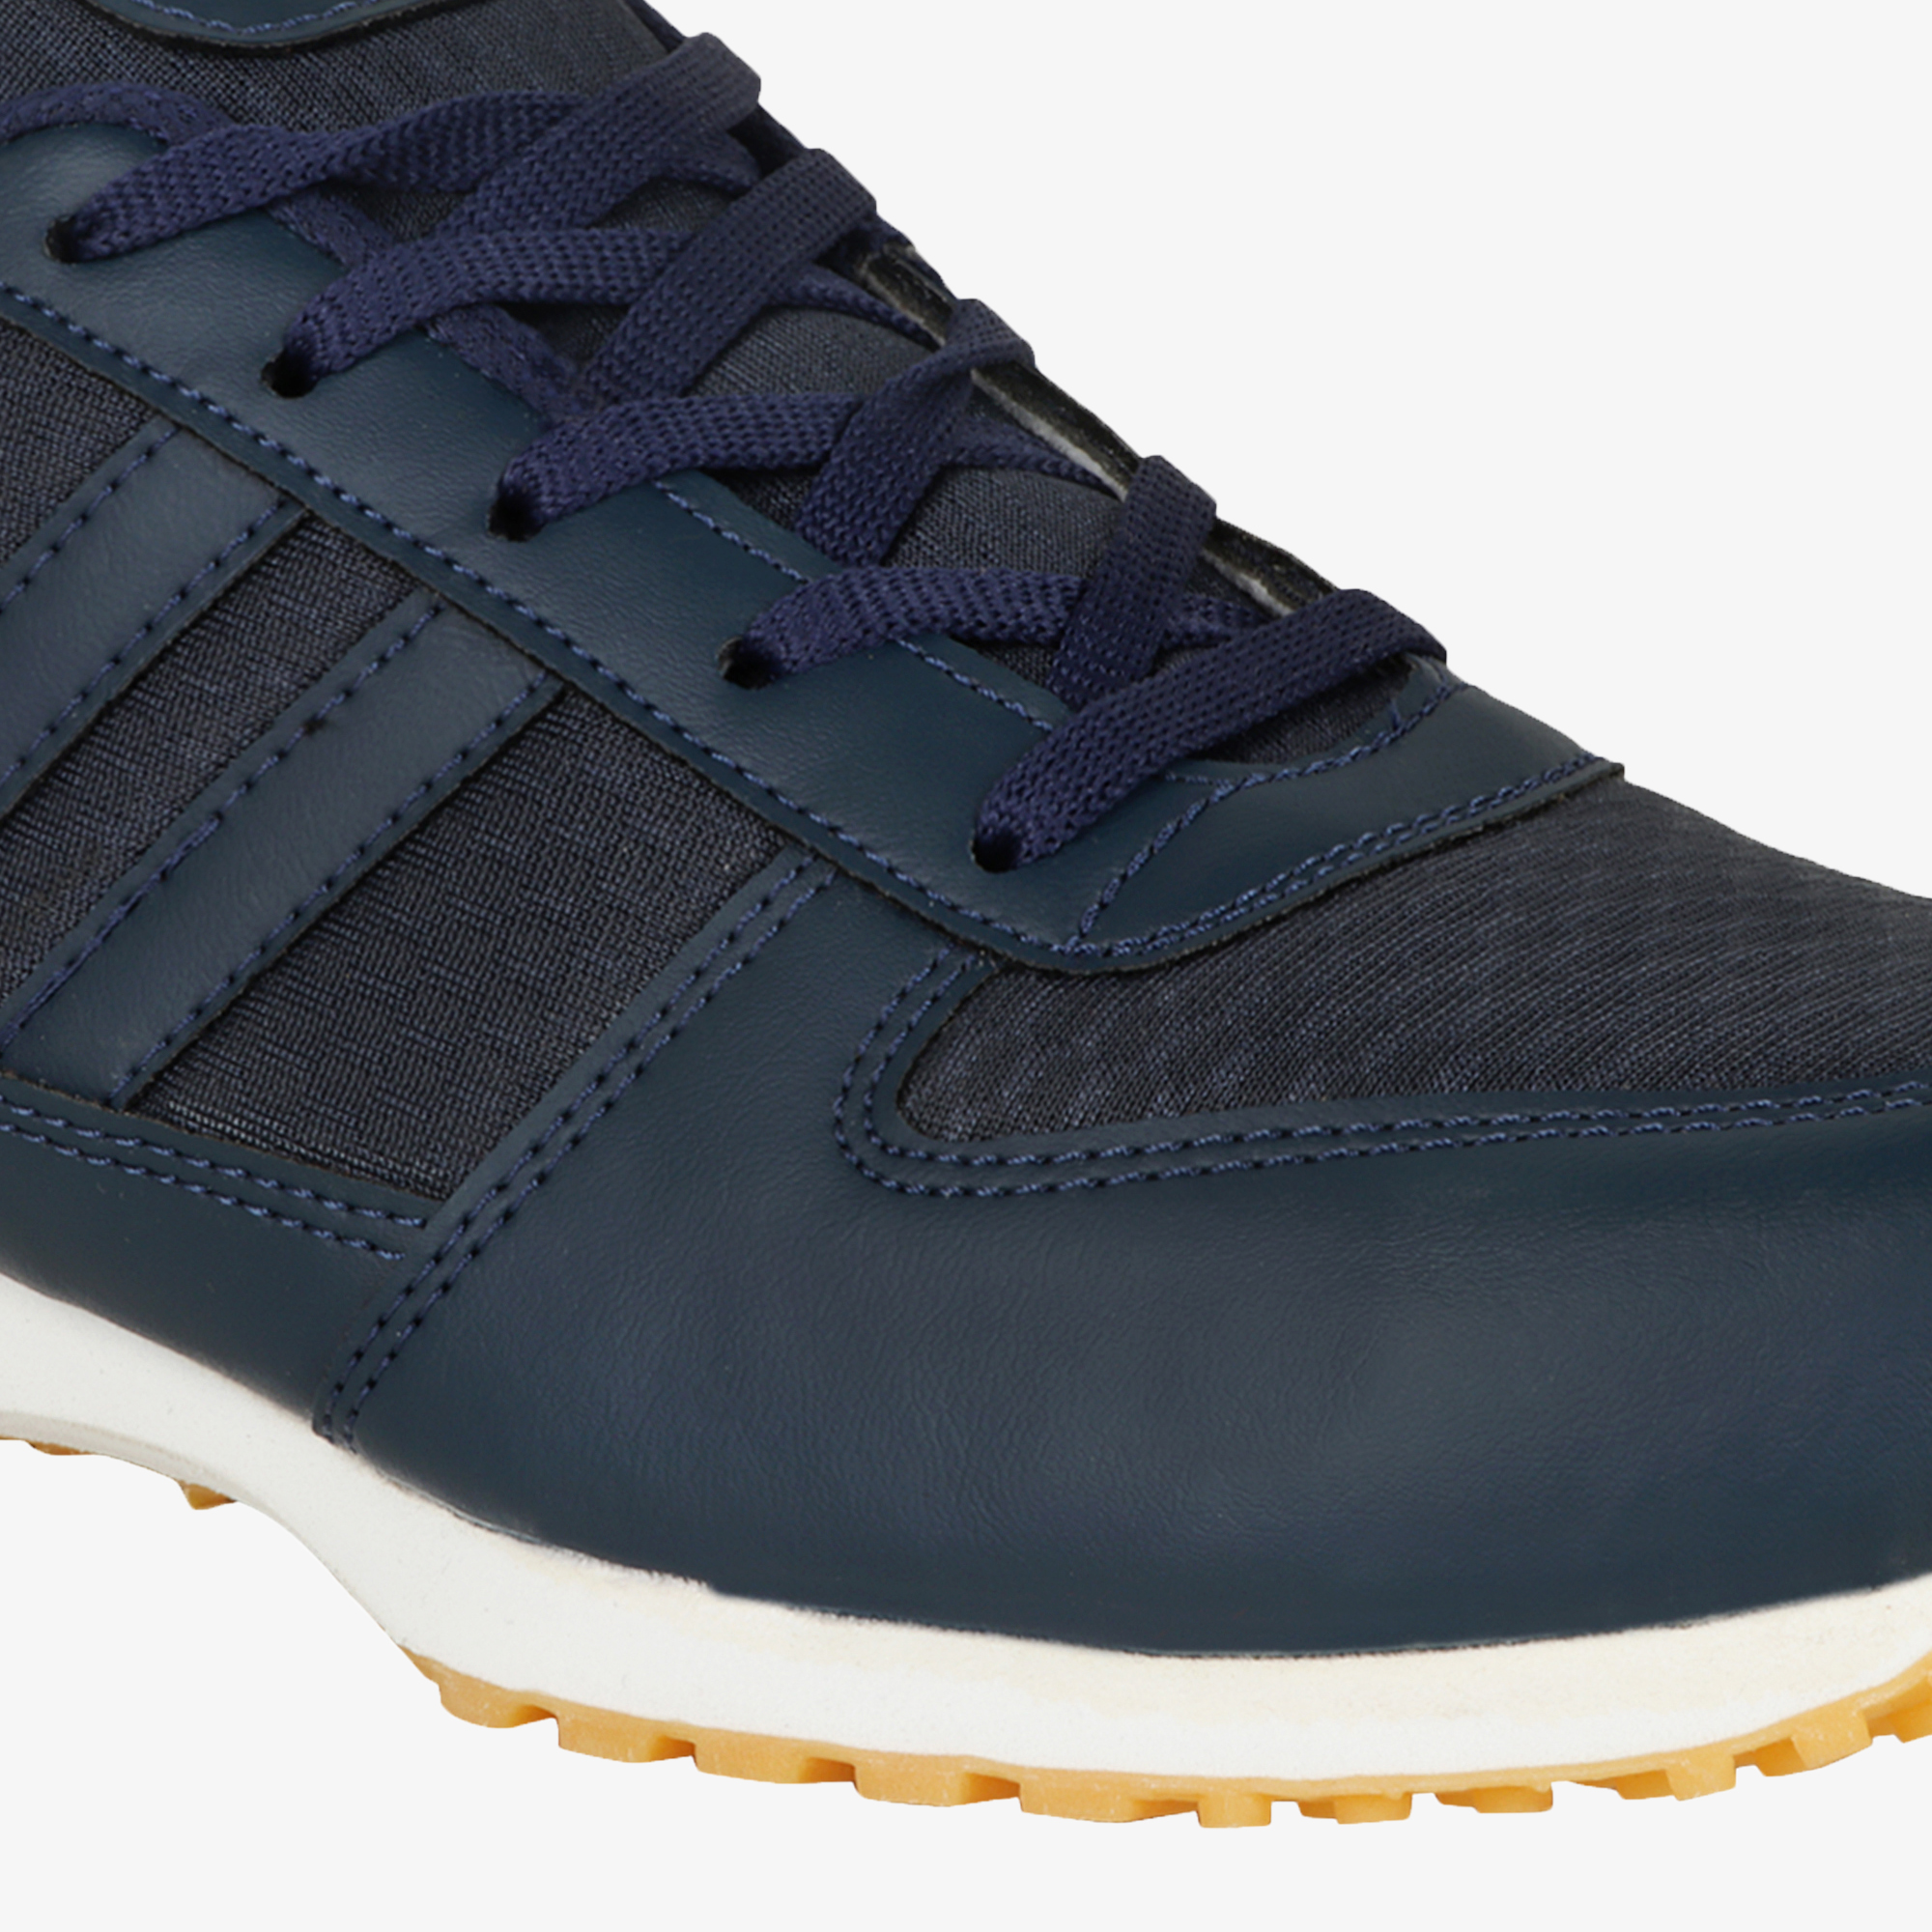 ASI Marathon Sports Shoes Navy blue Color | Lightweight & Extra Durable